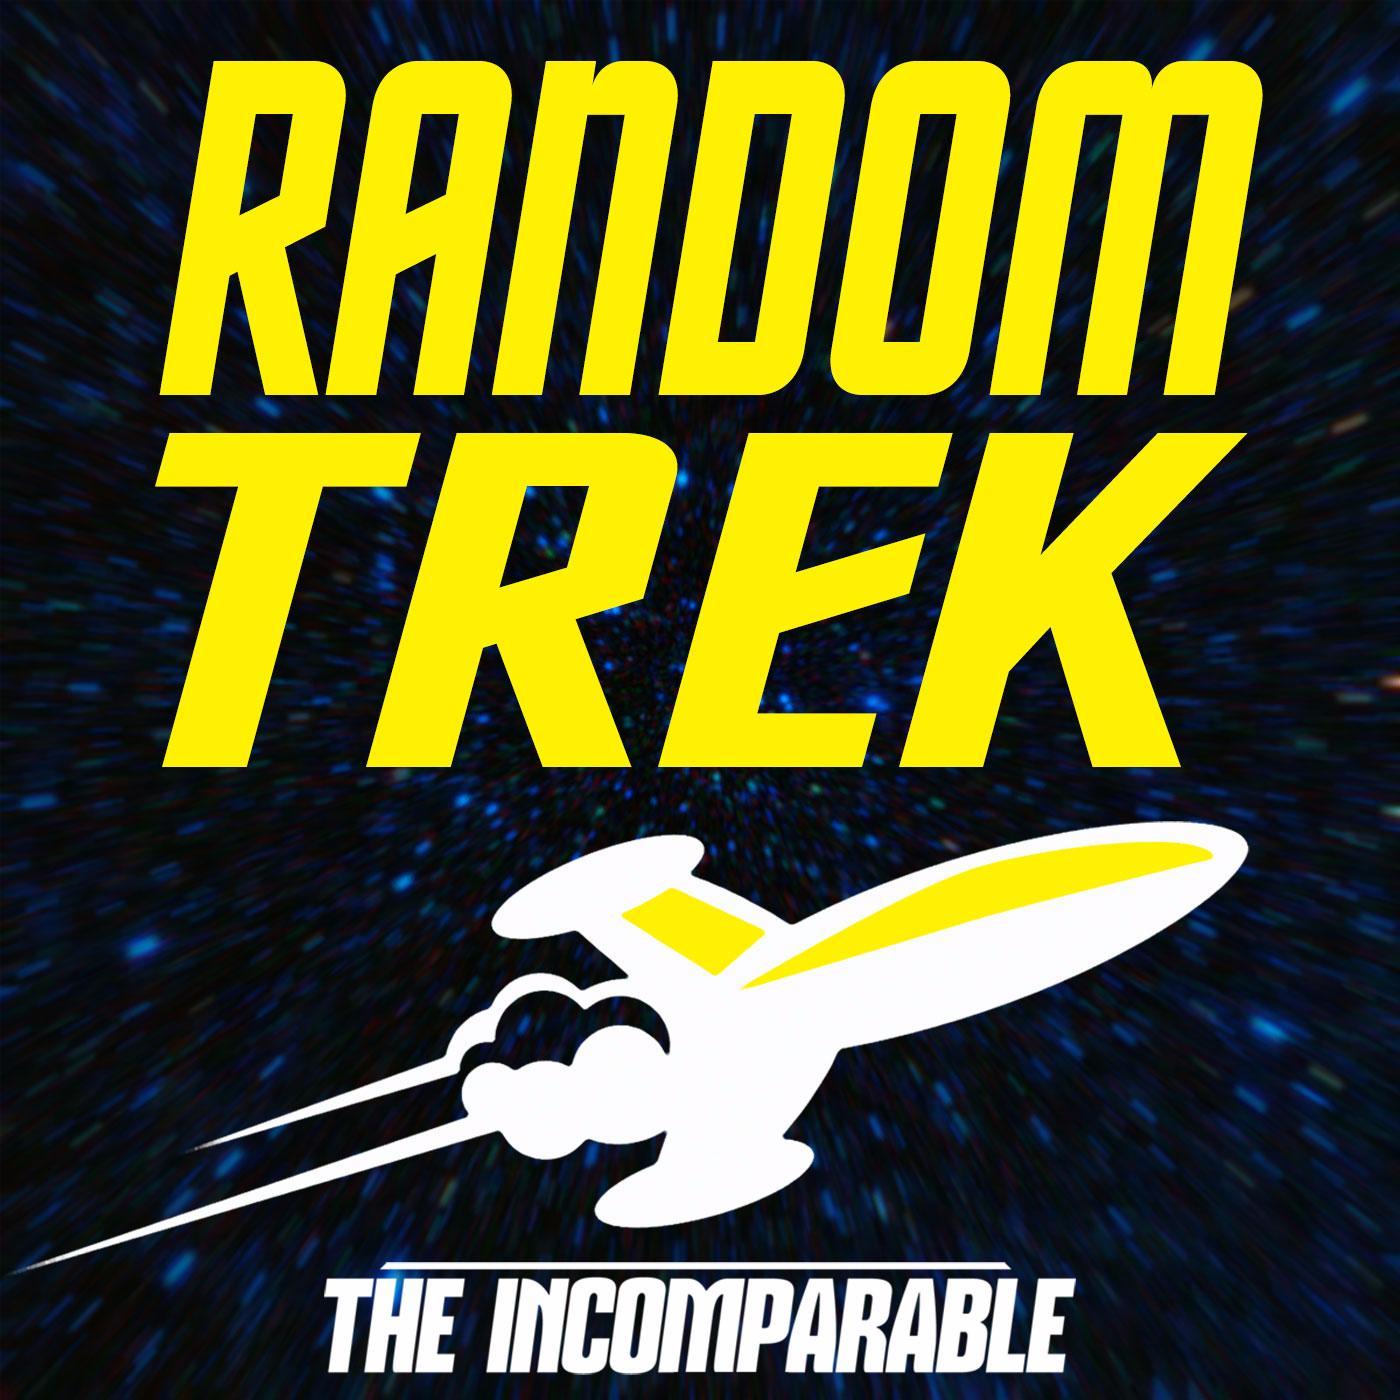 A random episode of Star Trek. @blankbaby and a guest. One Podcast.